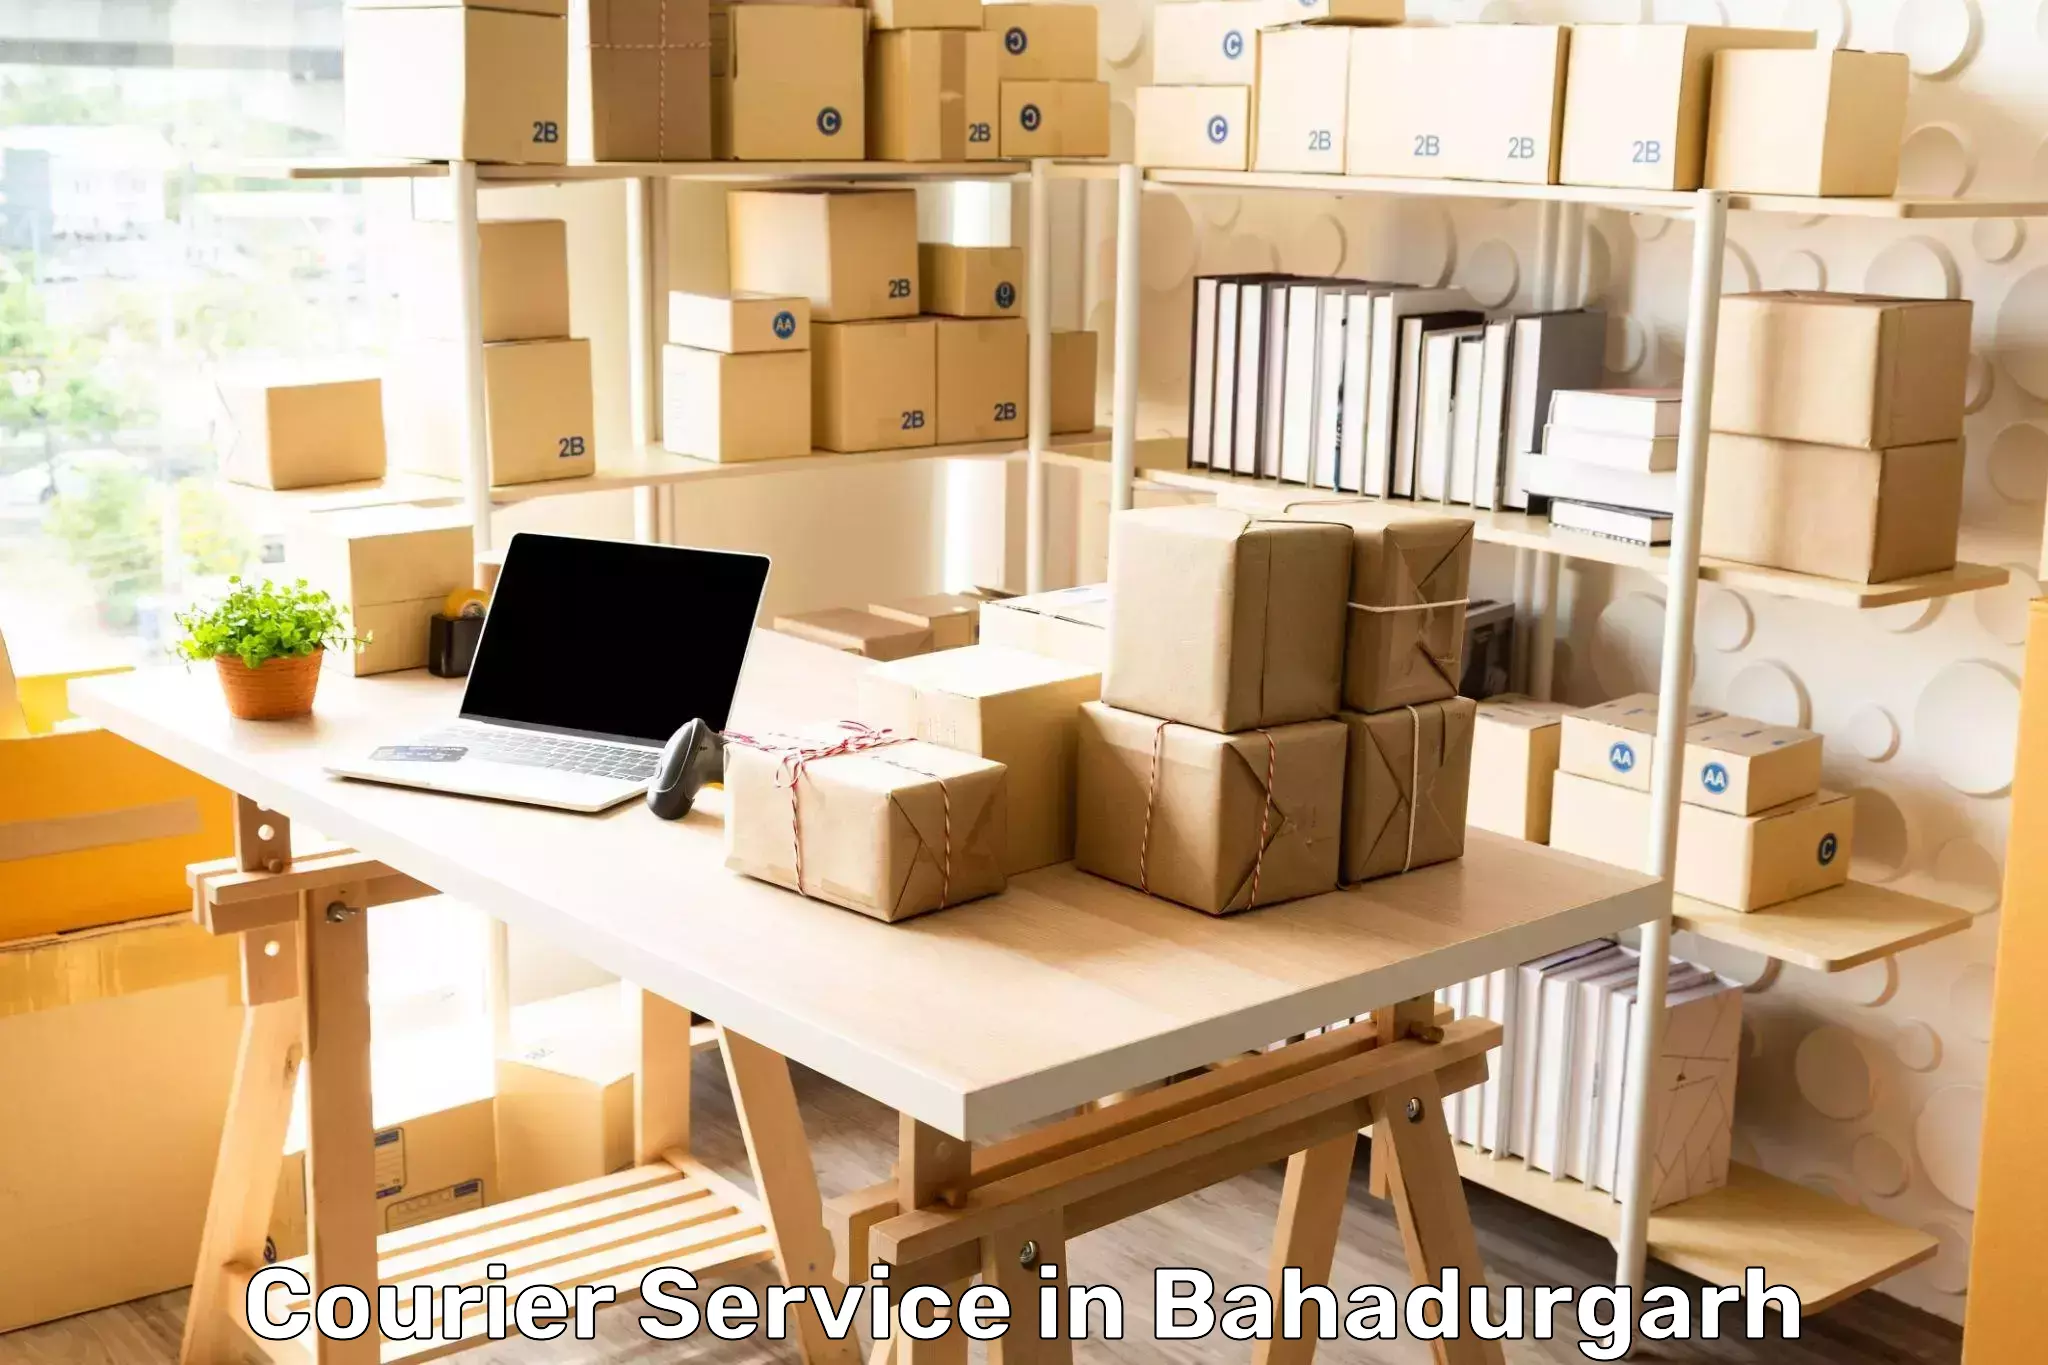 Customized delivery options in Bahadurgarh